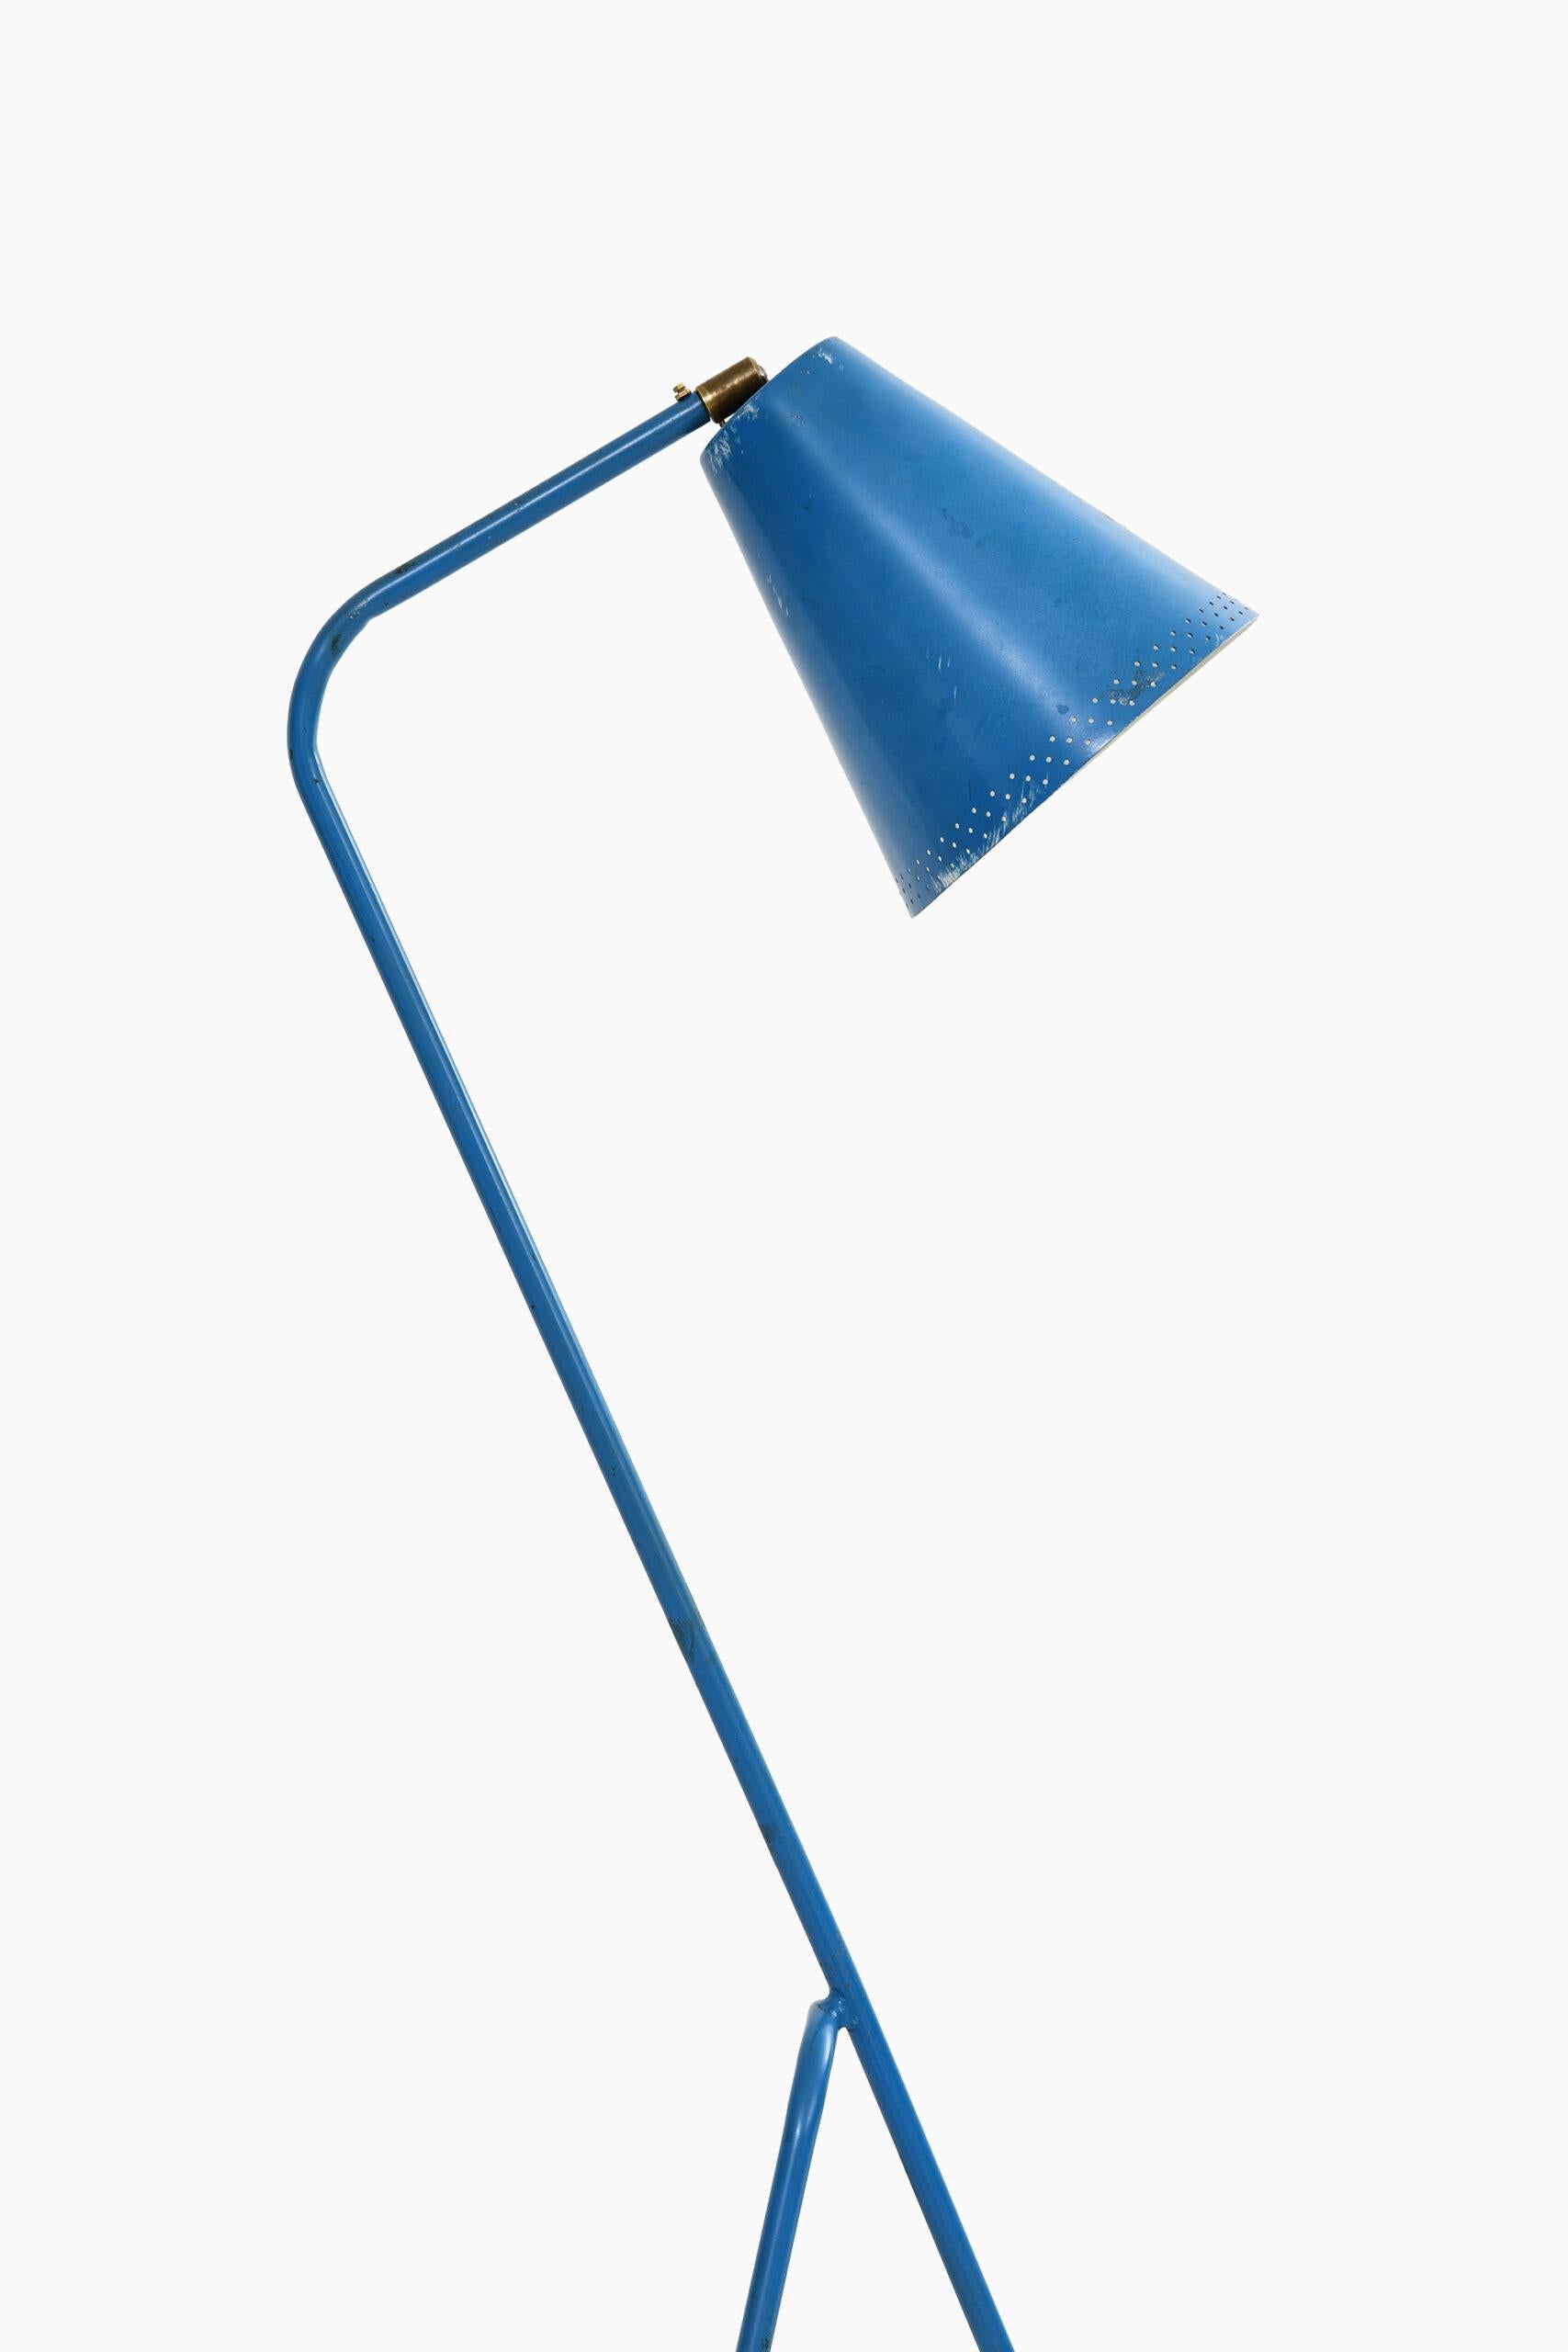 Scandinavian Modern Floor Lamp in the Style of Greta Magnusson-Grossman Probably Produced in Sweden For Sale